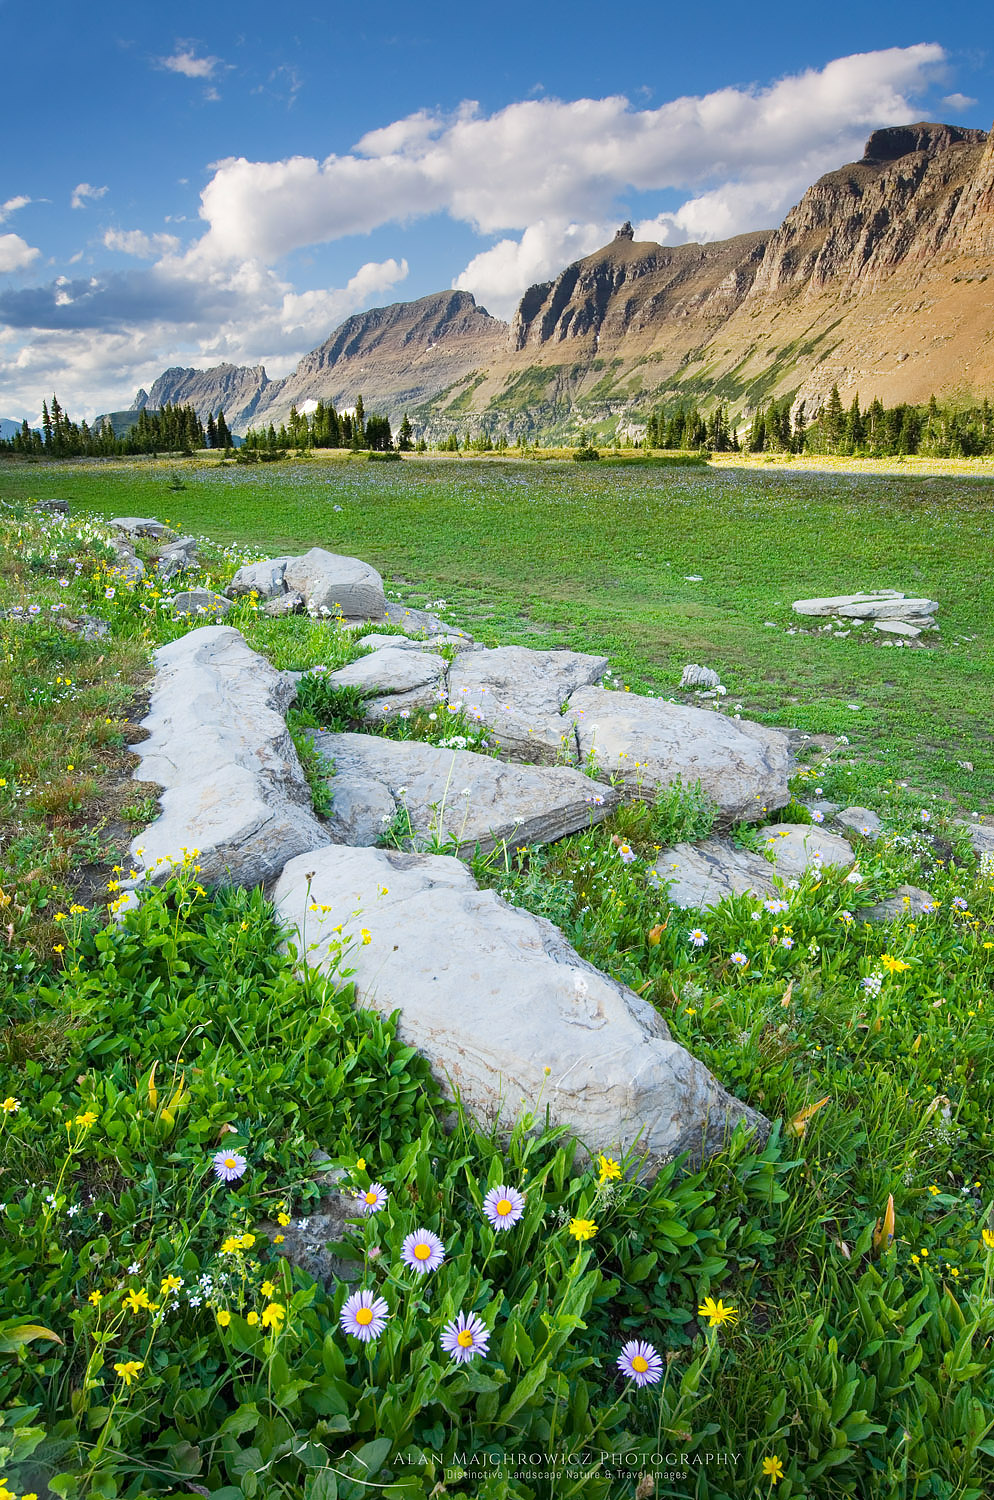 Alpine meadows at Logan Pass with the Garden Wall and Bishop's Cap in the distance, Glacier National Park Montana #46482